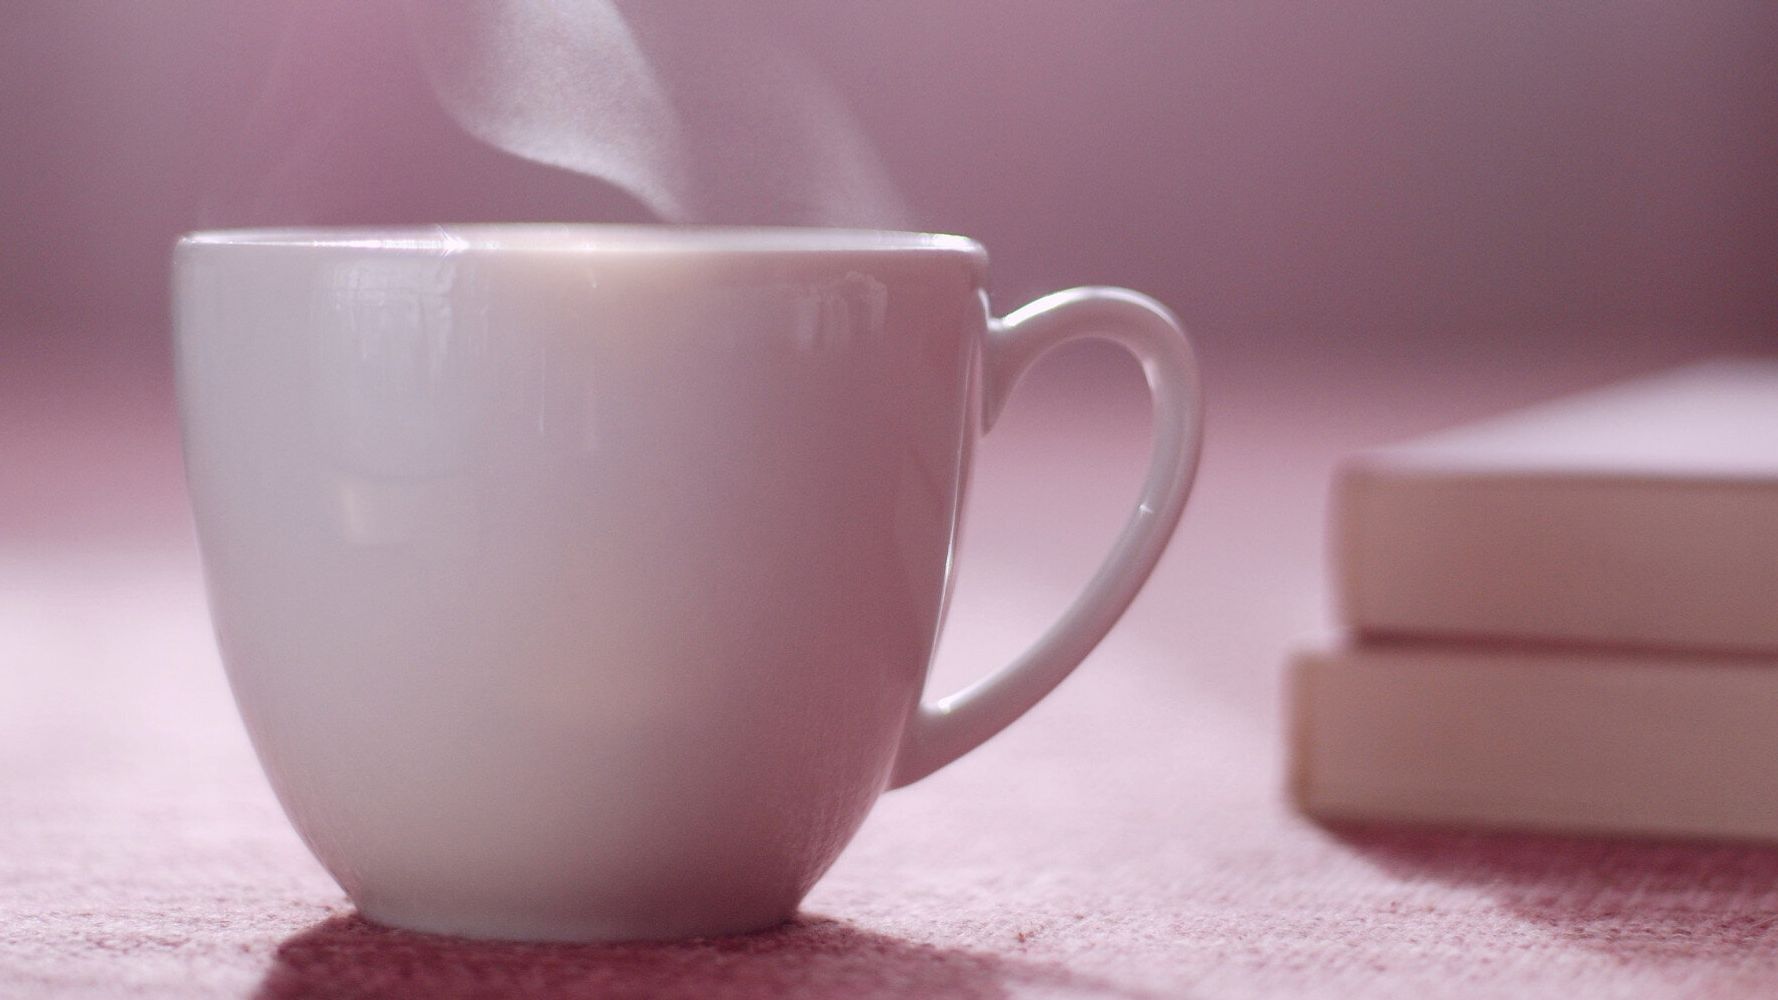 Drinking Tea And Coffee Regularly Could Cut Risk Of Diabetes And Heart